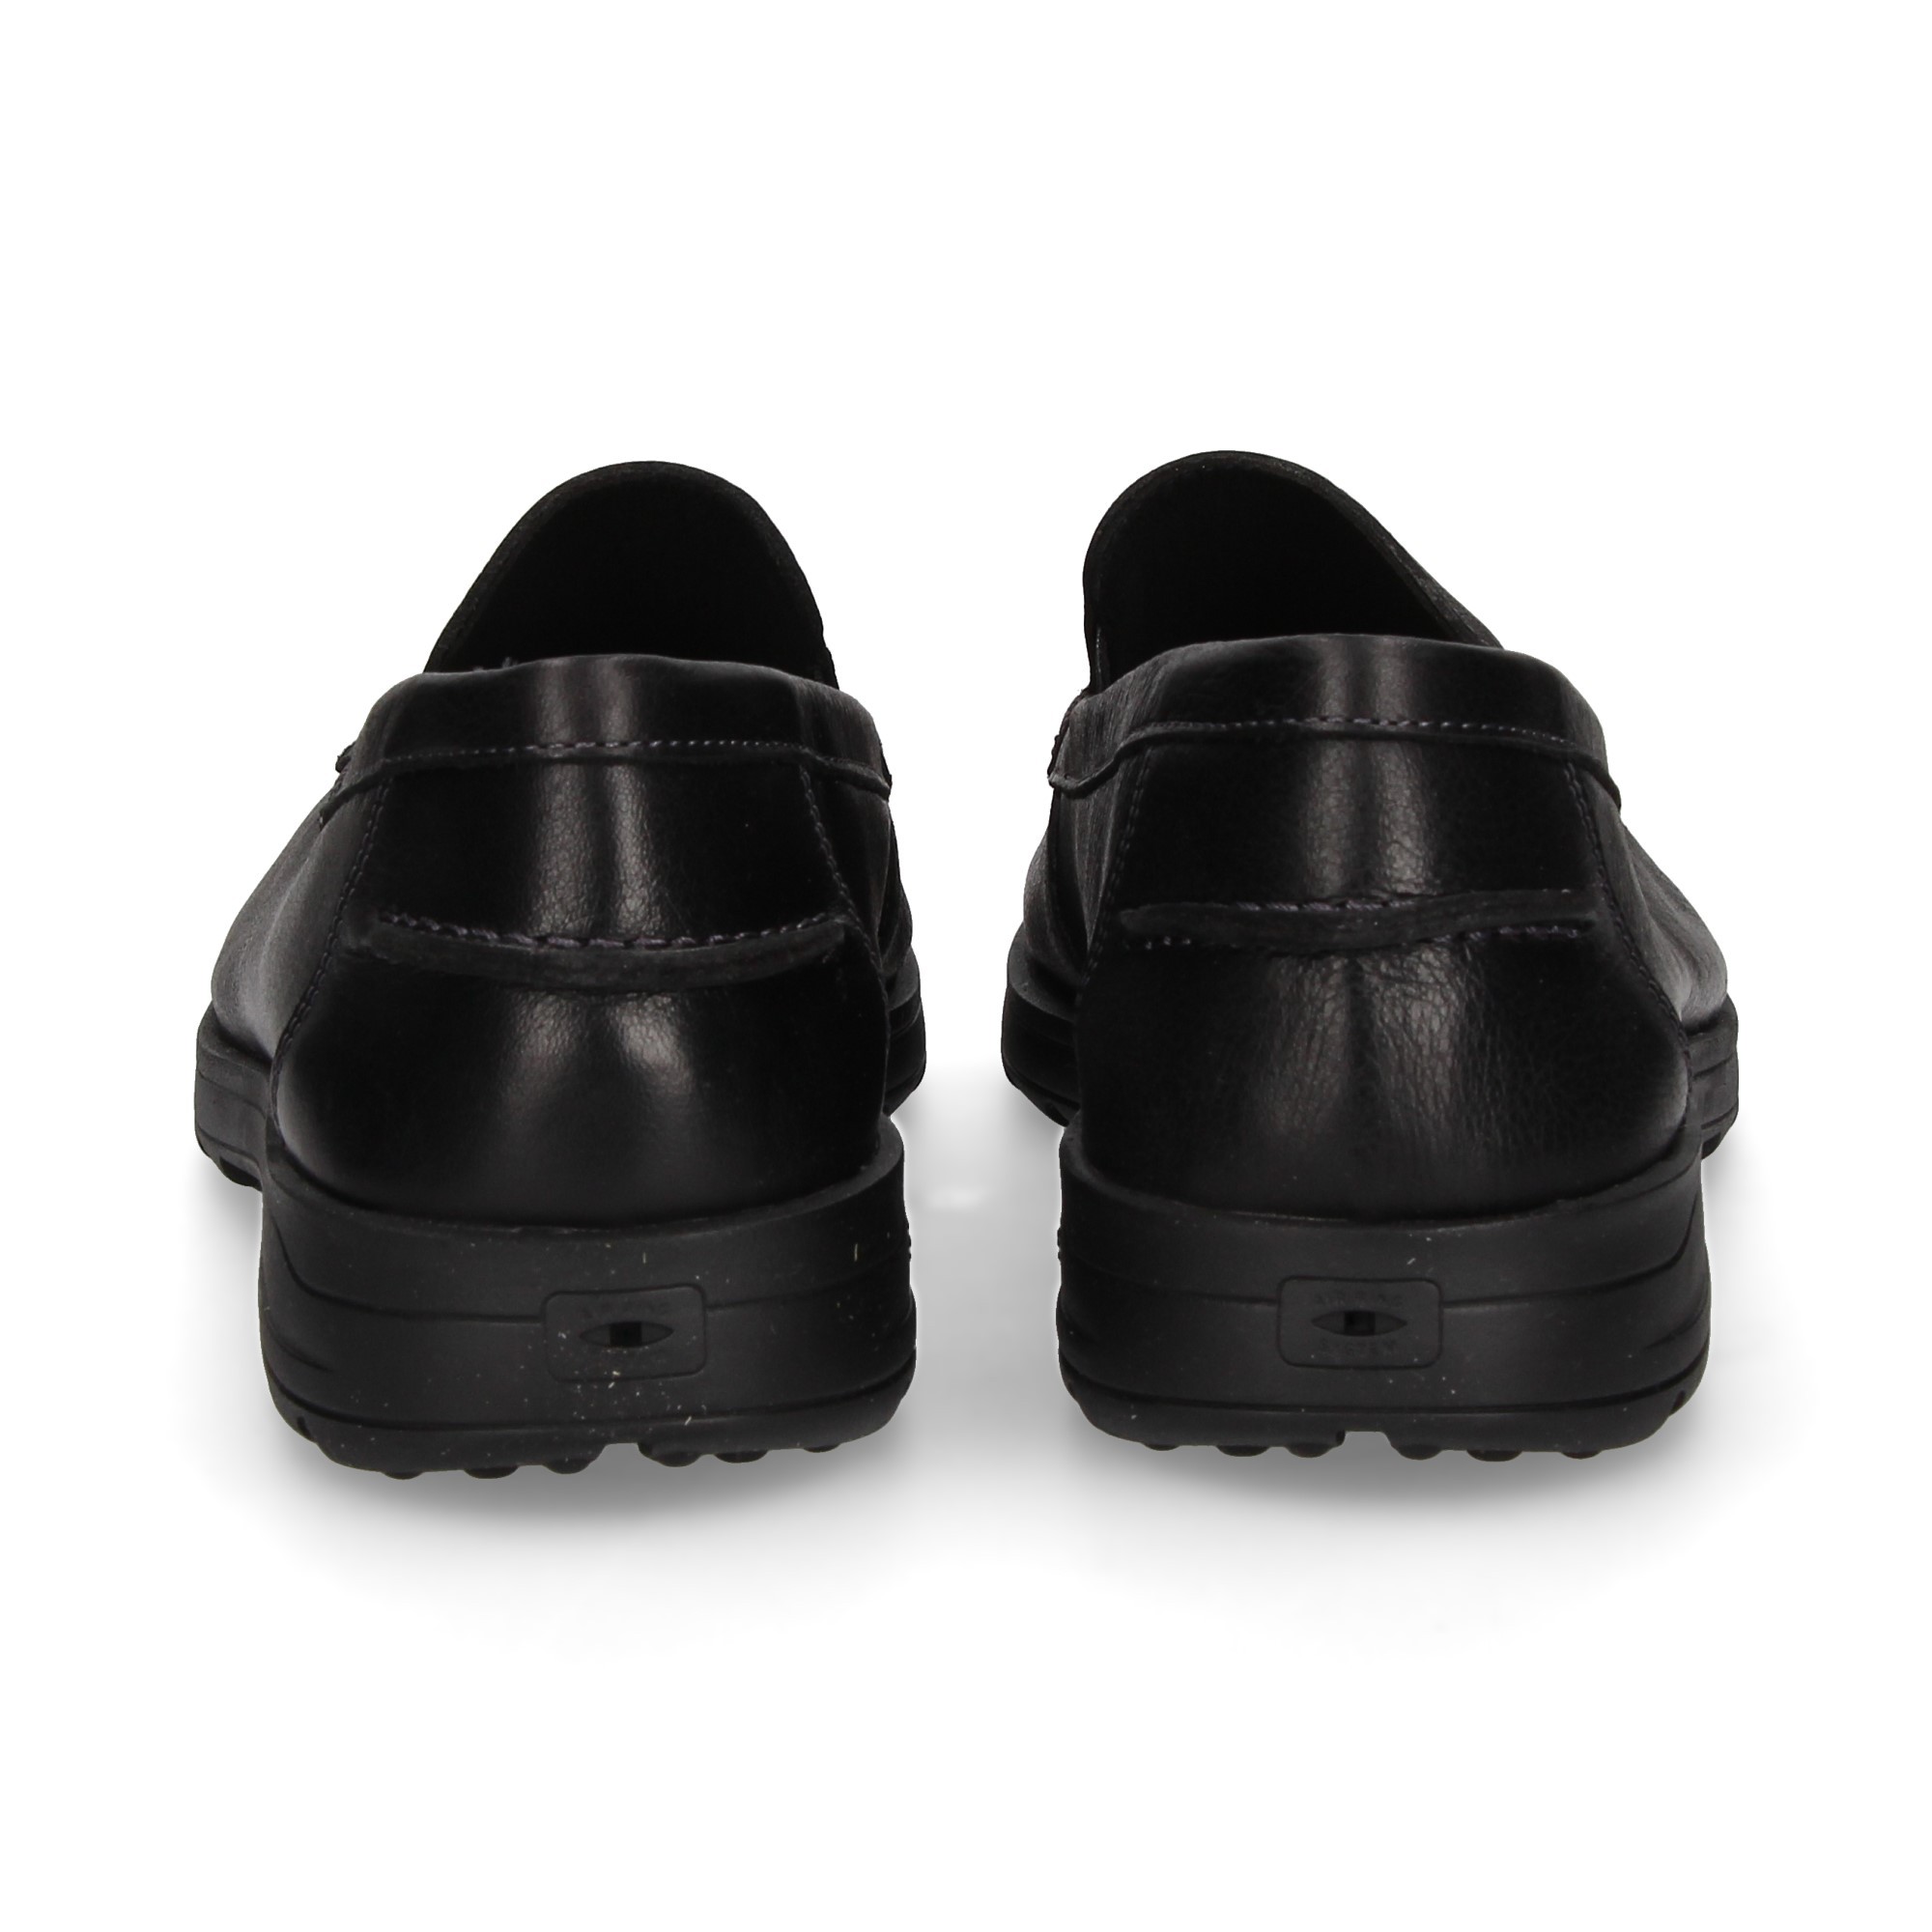 black-leather-moccasin